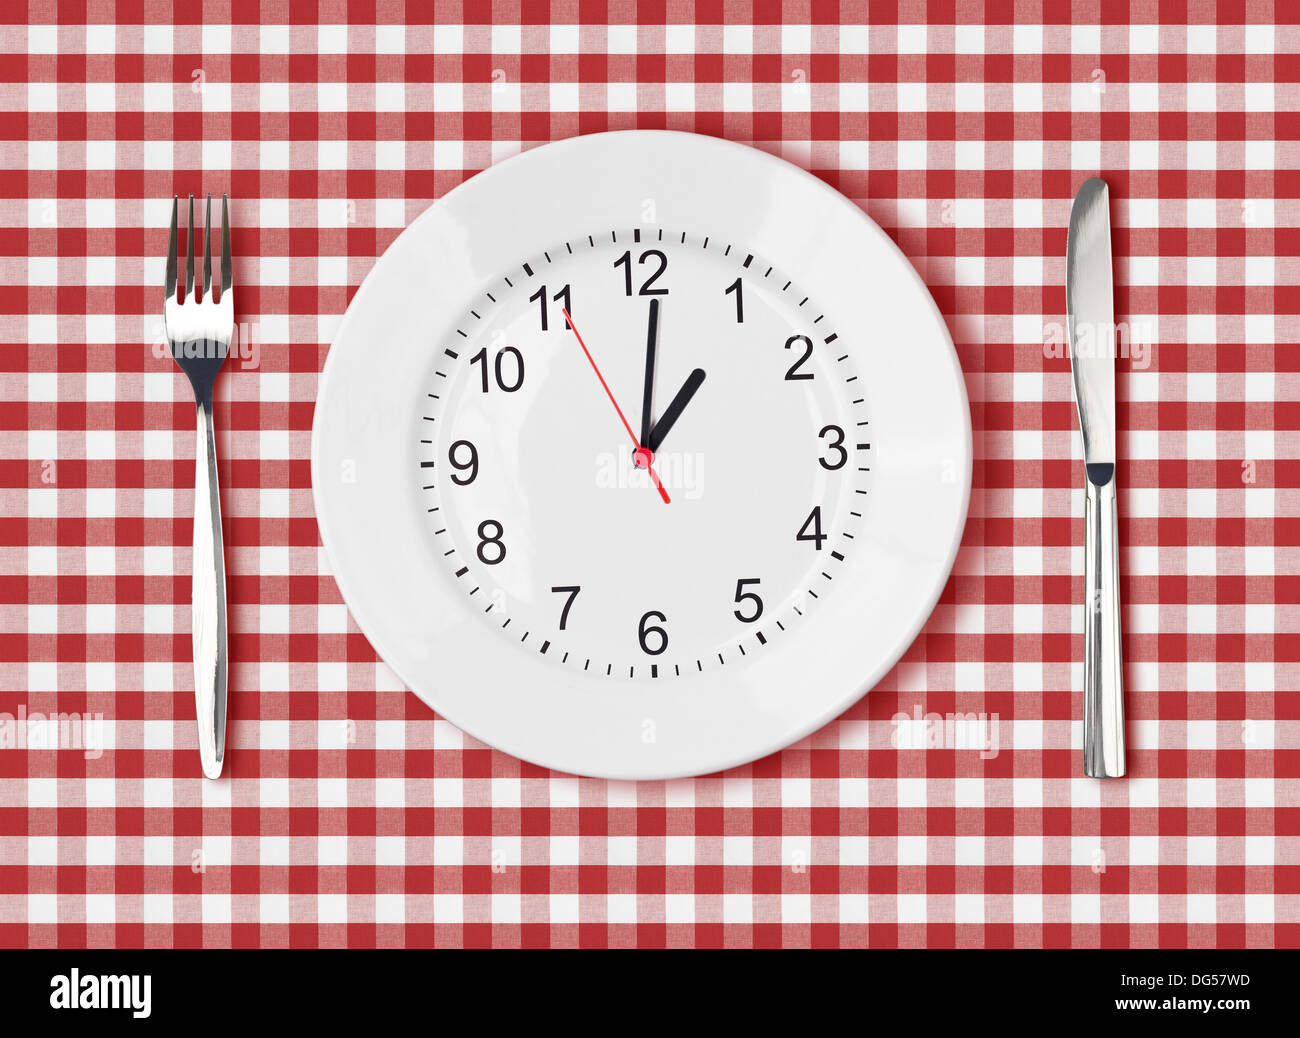 Knife, white plate with clock face and fork on red picnic table cloth Stock Photo